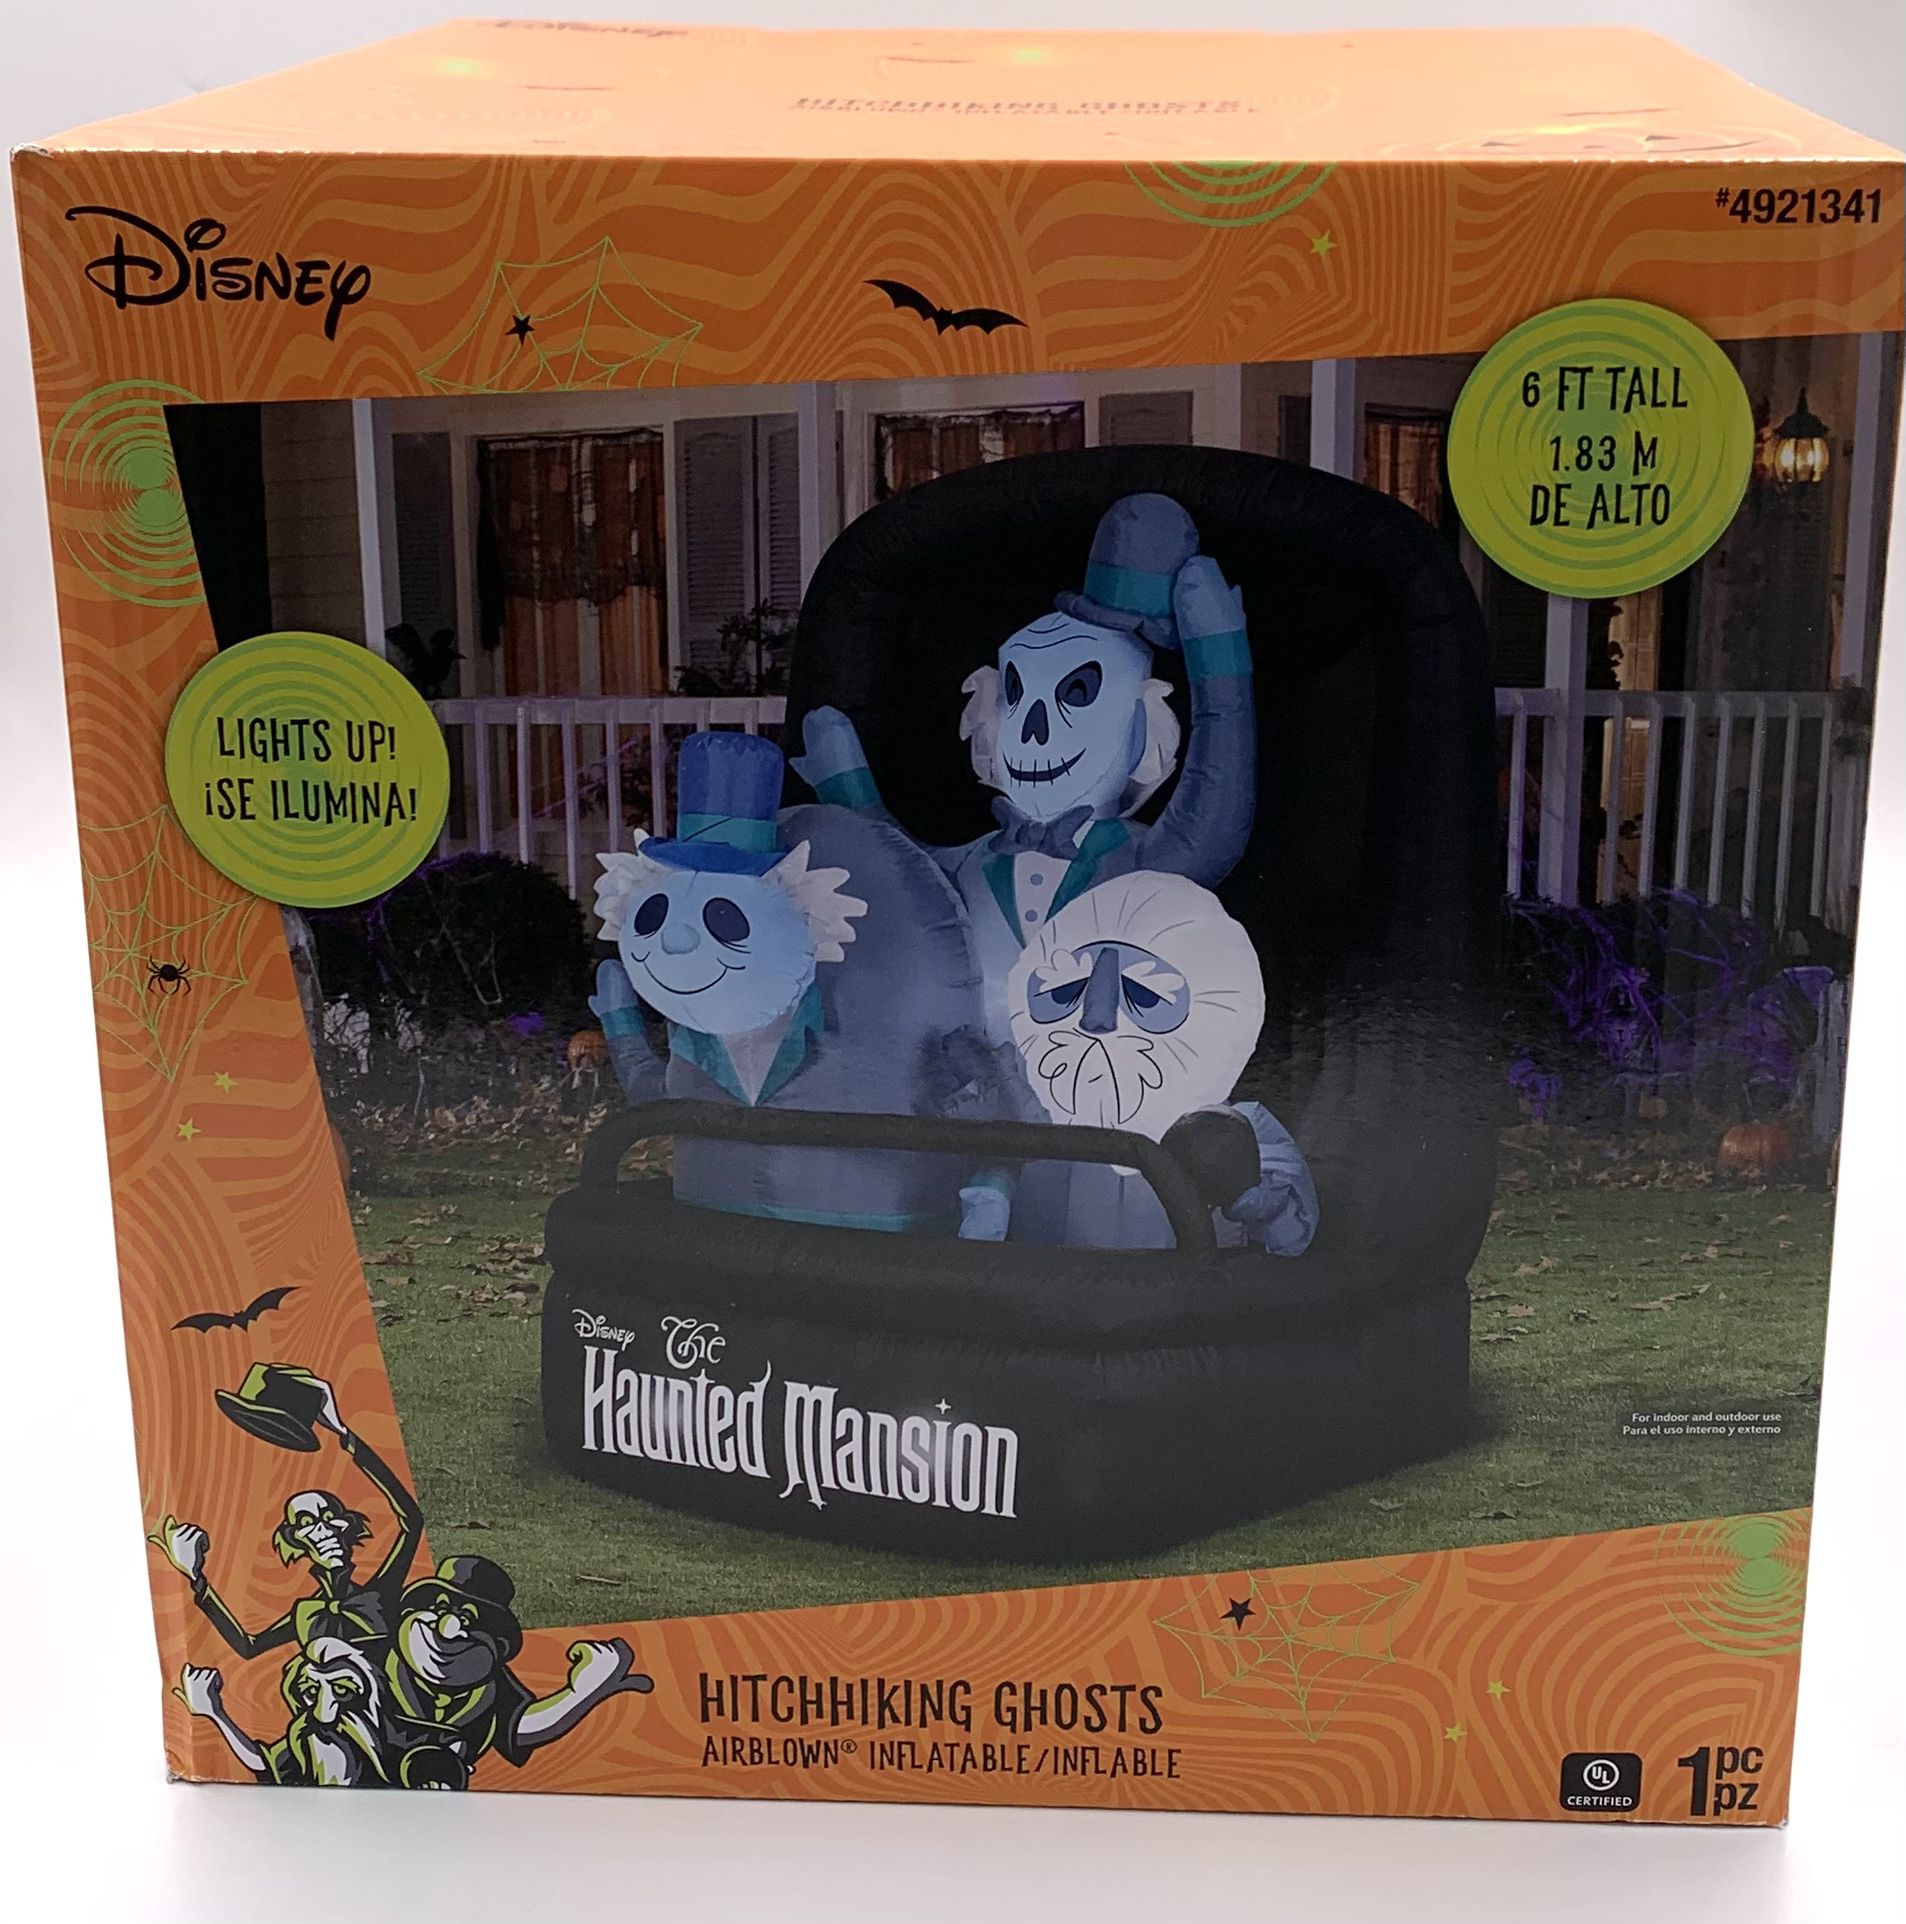  Gemmy 6' Tall x 4.9' Wide Haunted Mansion Hitchhiking